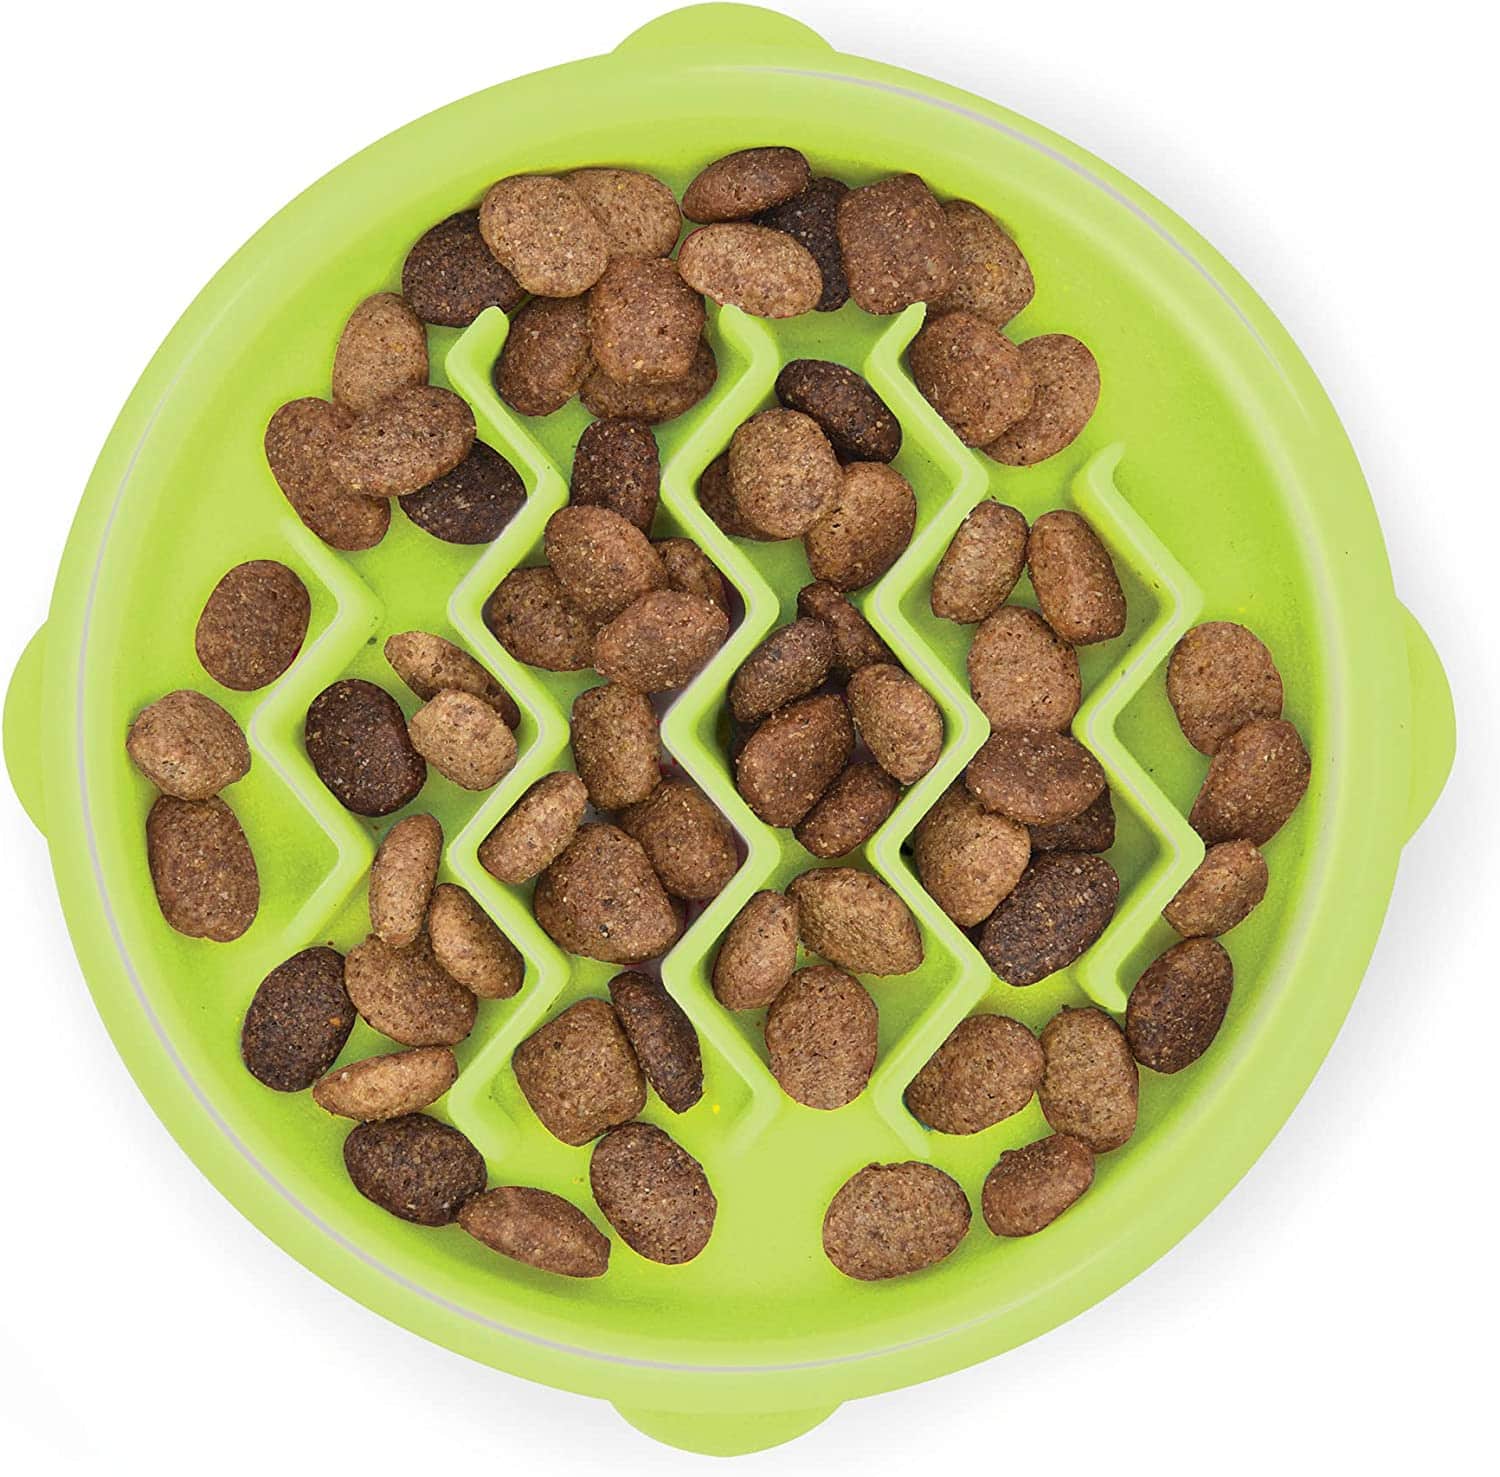 The 10 Best Slow Feeders for Speed-Eating Cats